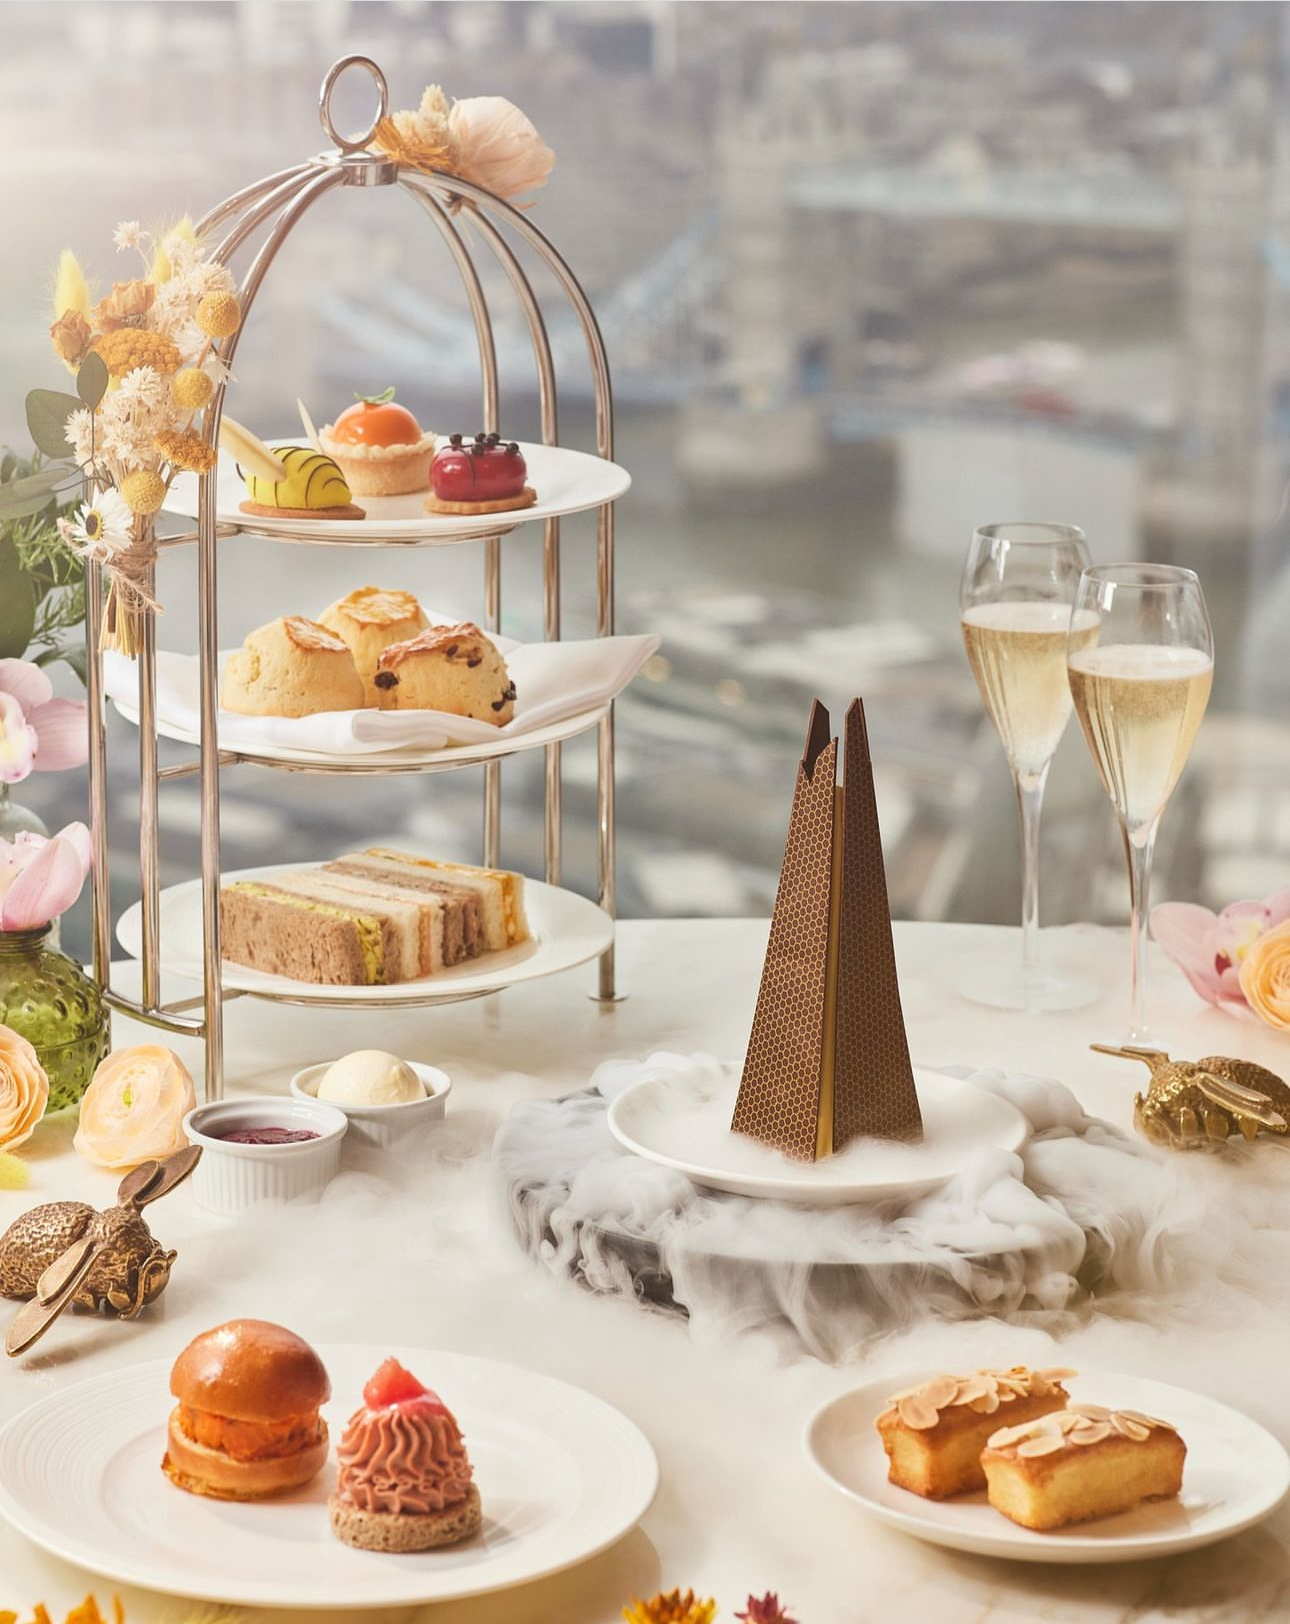 a spread of afternoon tea with pastries, scones, sandwiches and bubbly drinls